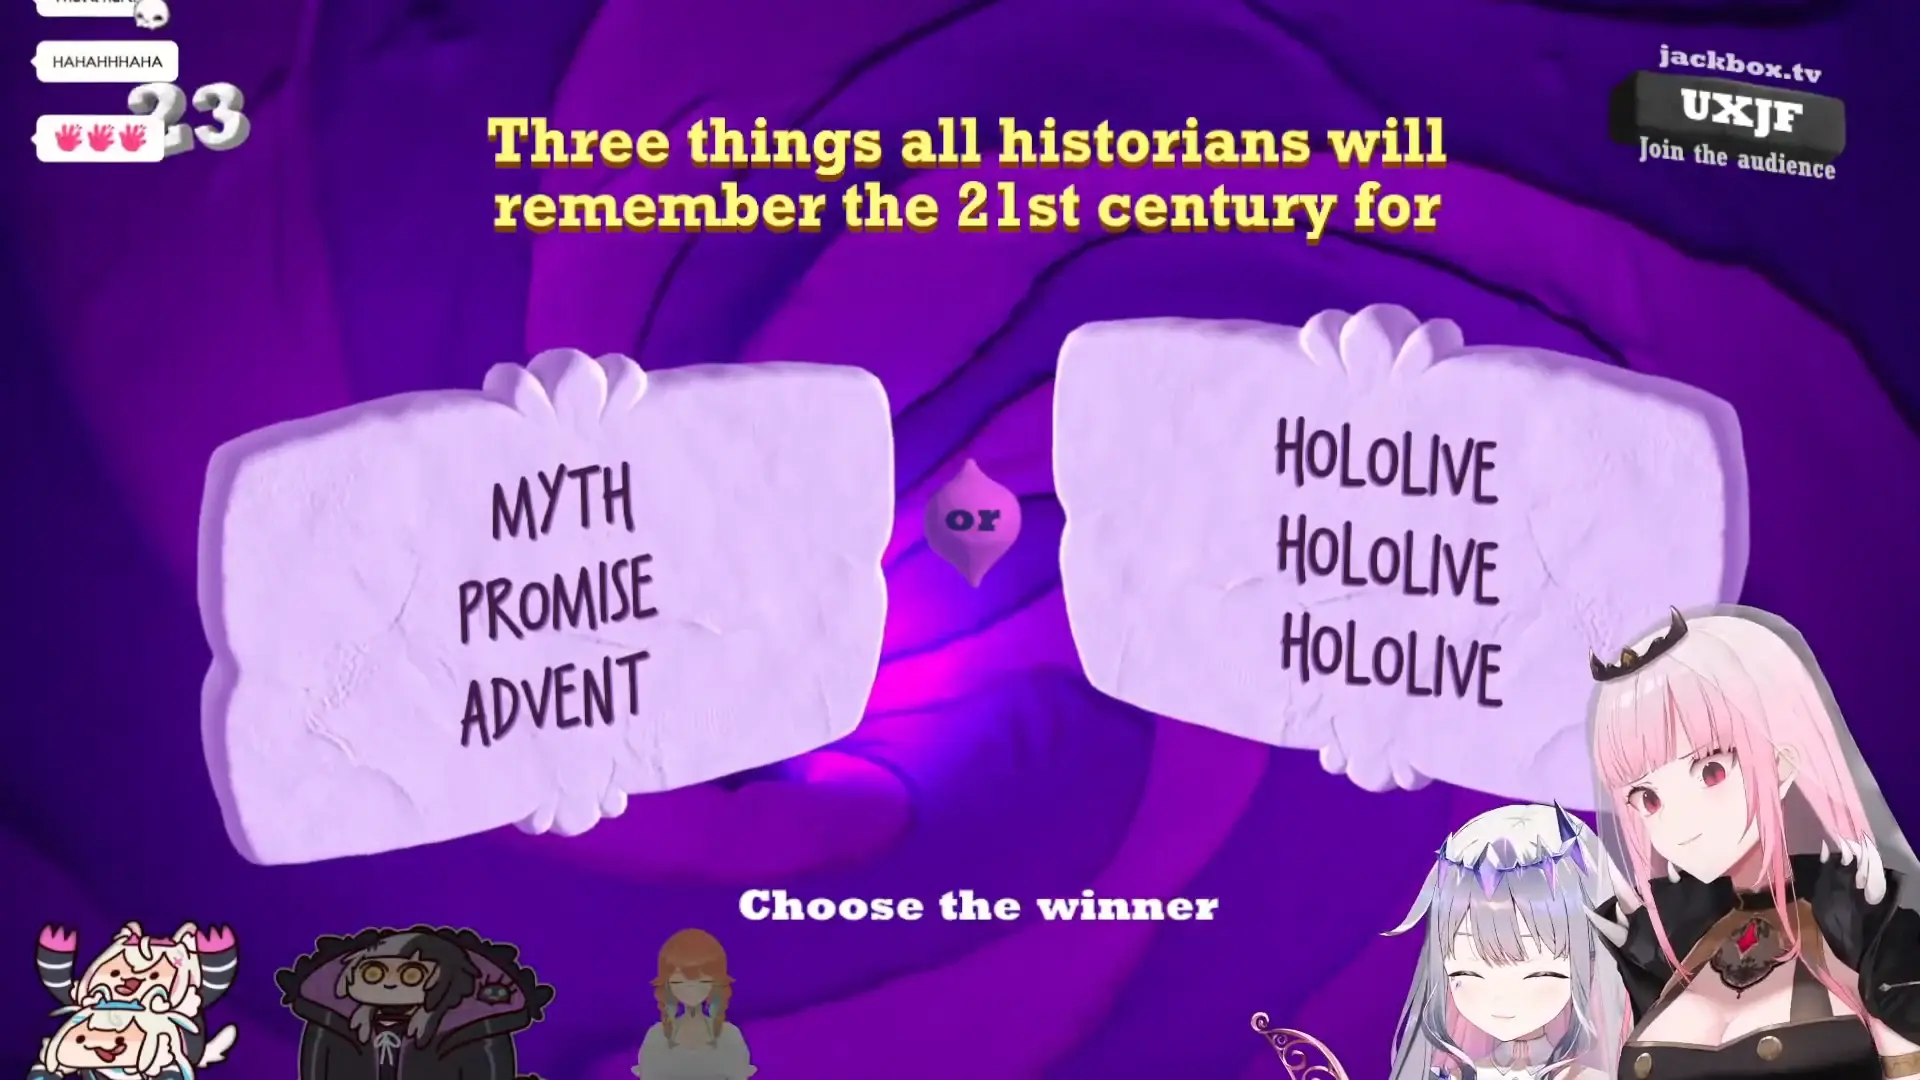 Jackbox Quiplash game. Question: "Three things all historians will remember the 21st century for" Answer 1: "Myth, Promise, Advent". Answer 2: "Hololive, Hololive, Hololive".